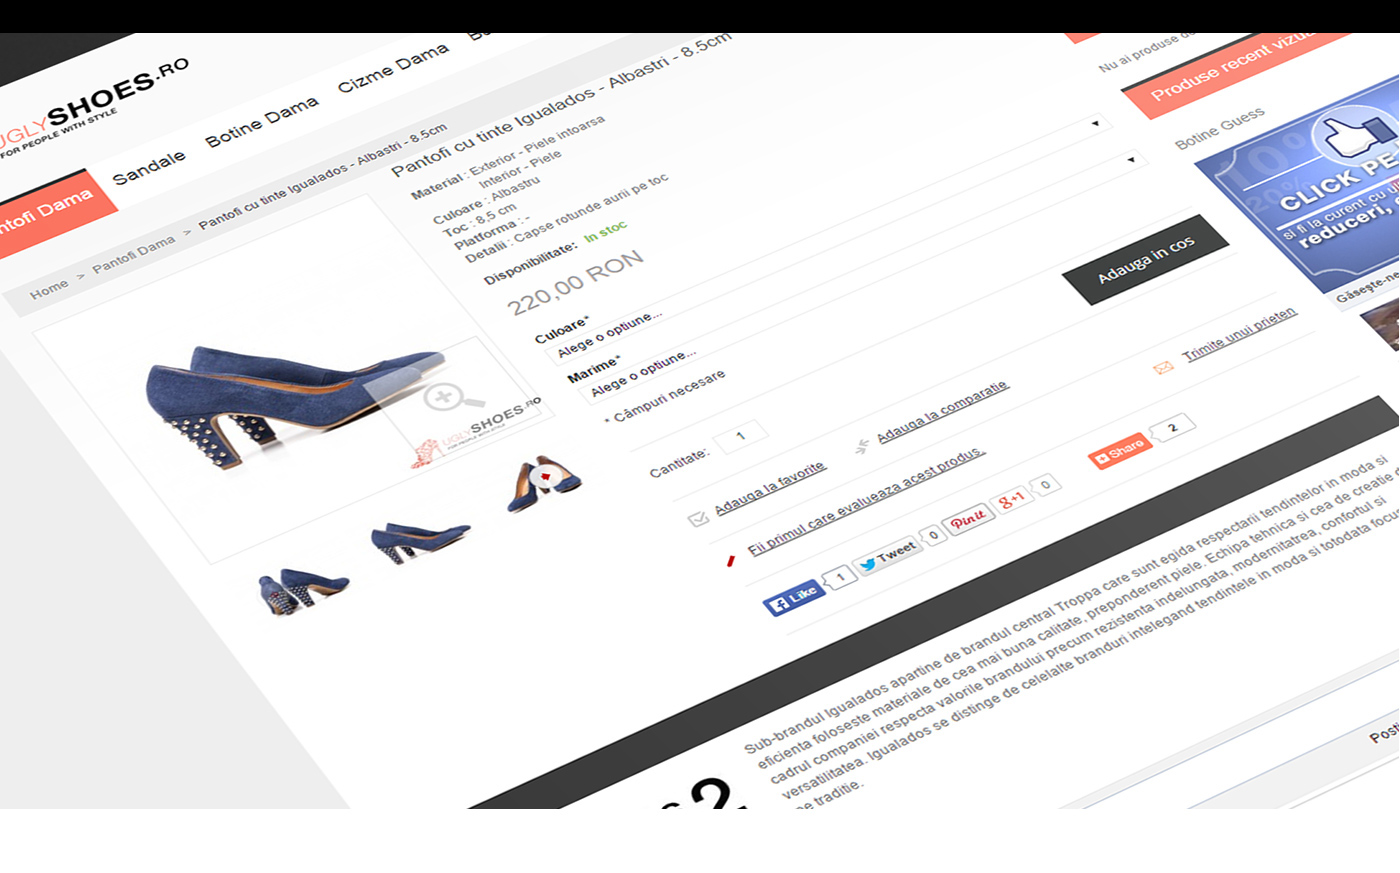 ux UI design user experience visual design Fashion Store Ecommerce shoes interaction designer IxD magento online clean modern